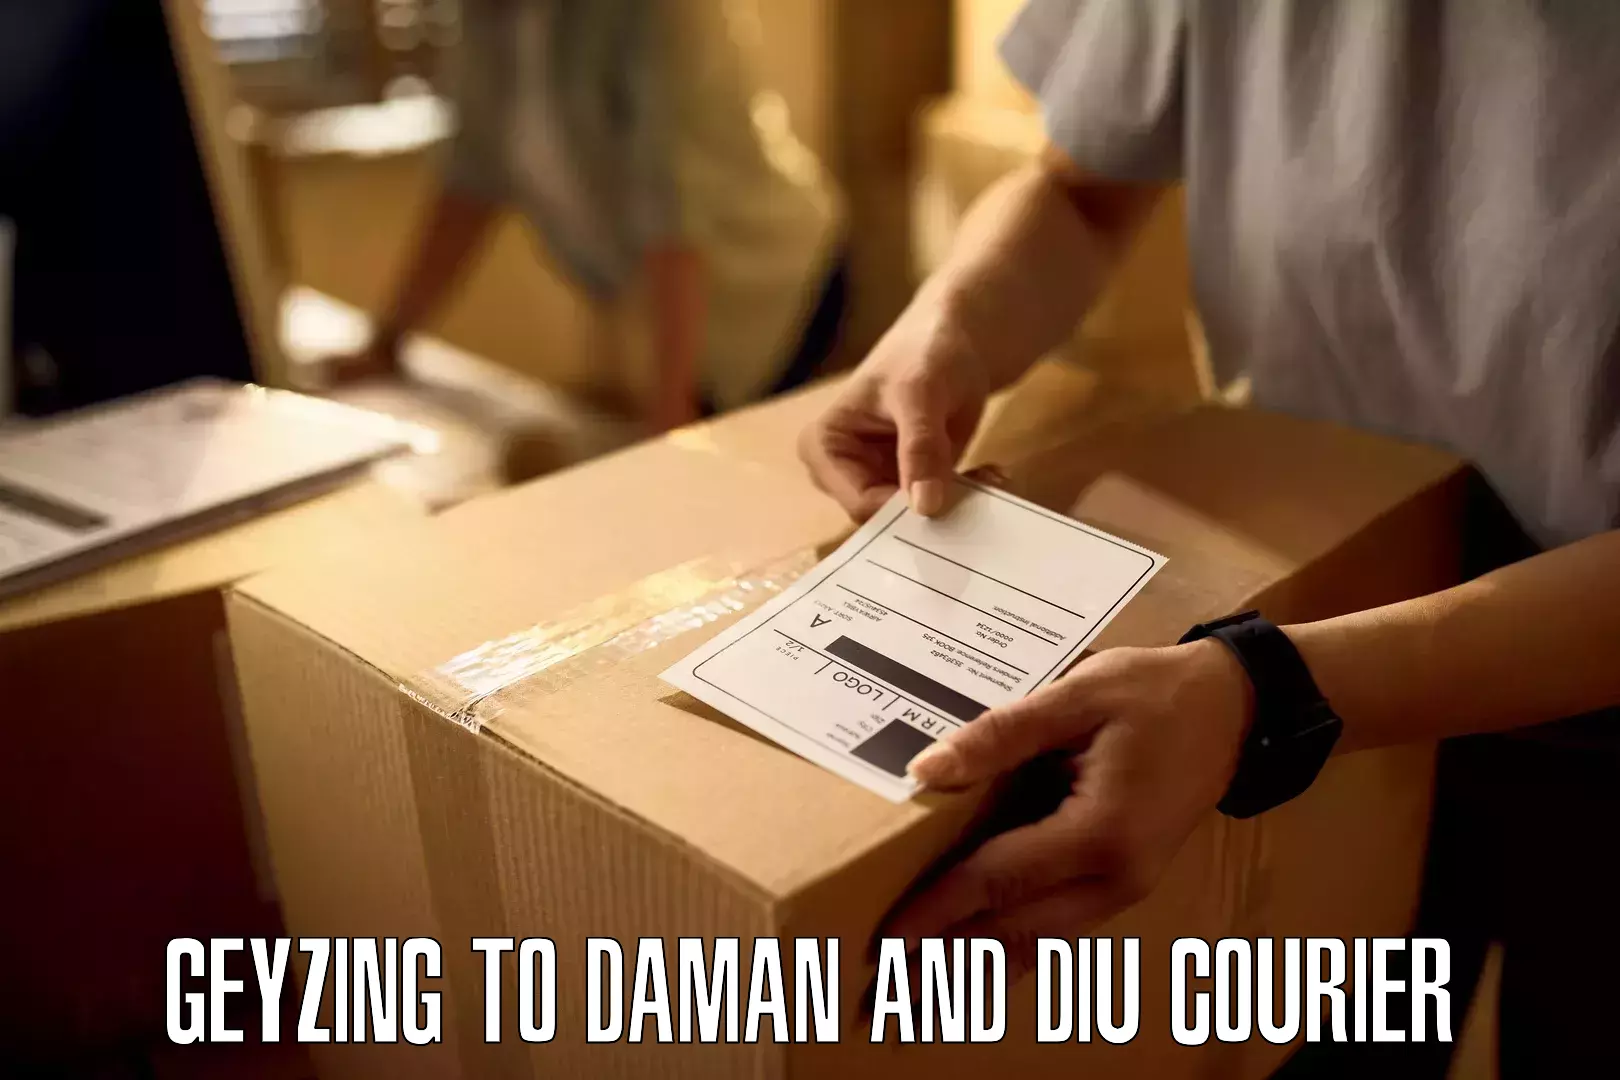 Courier service comparison Geyzing to Diu